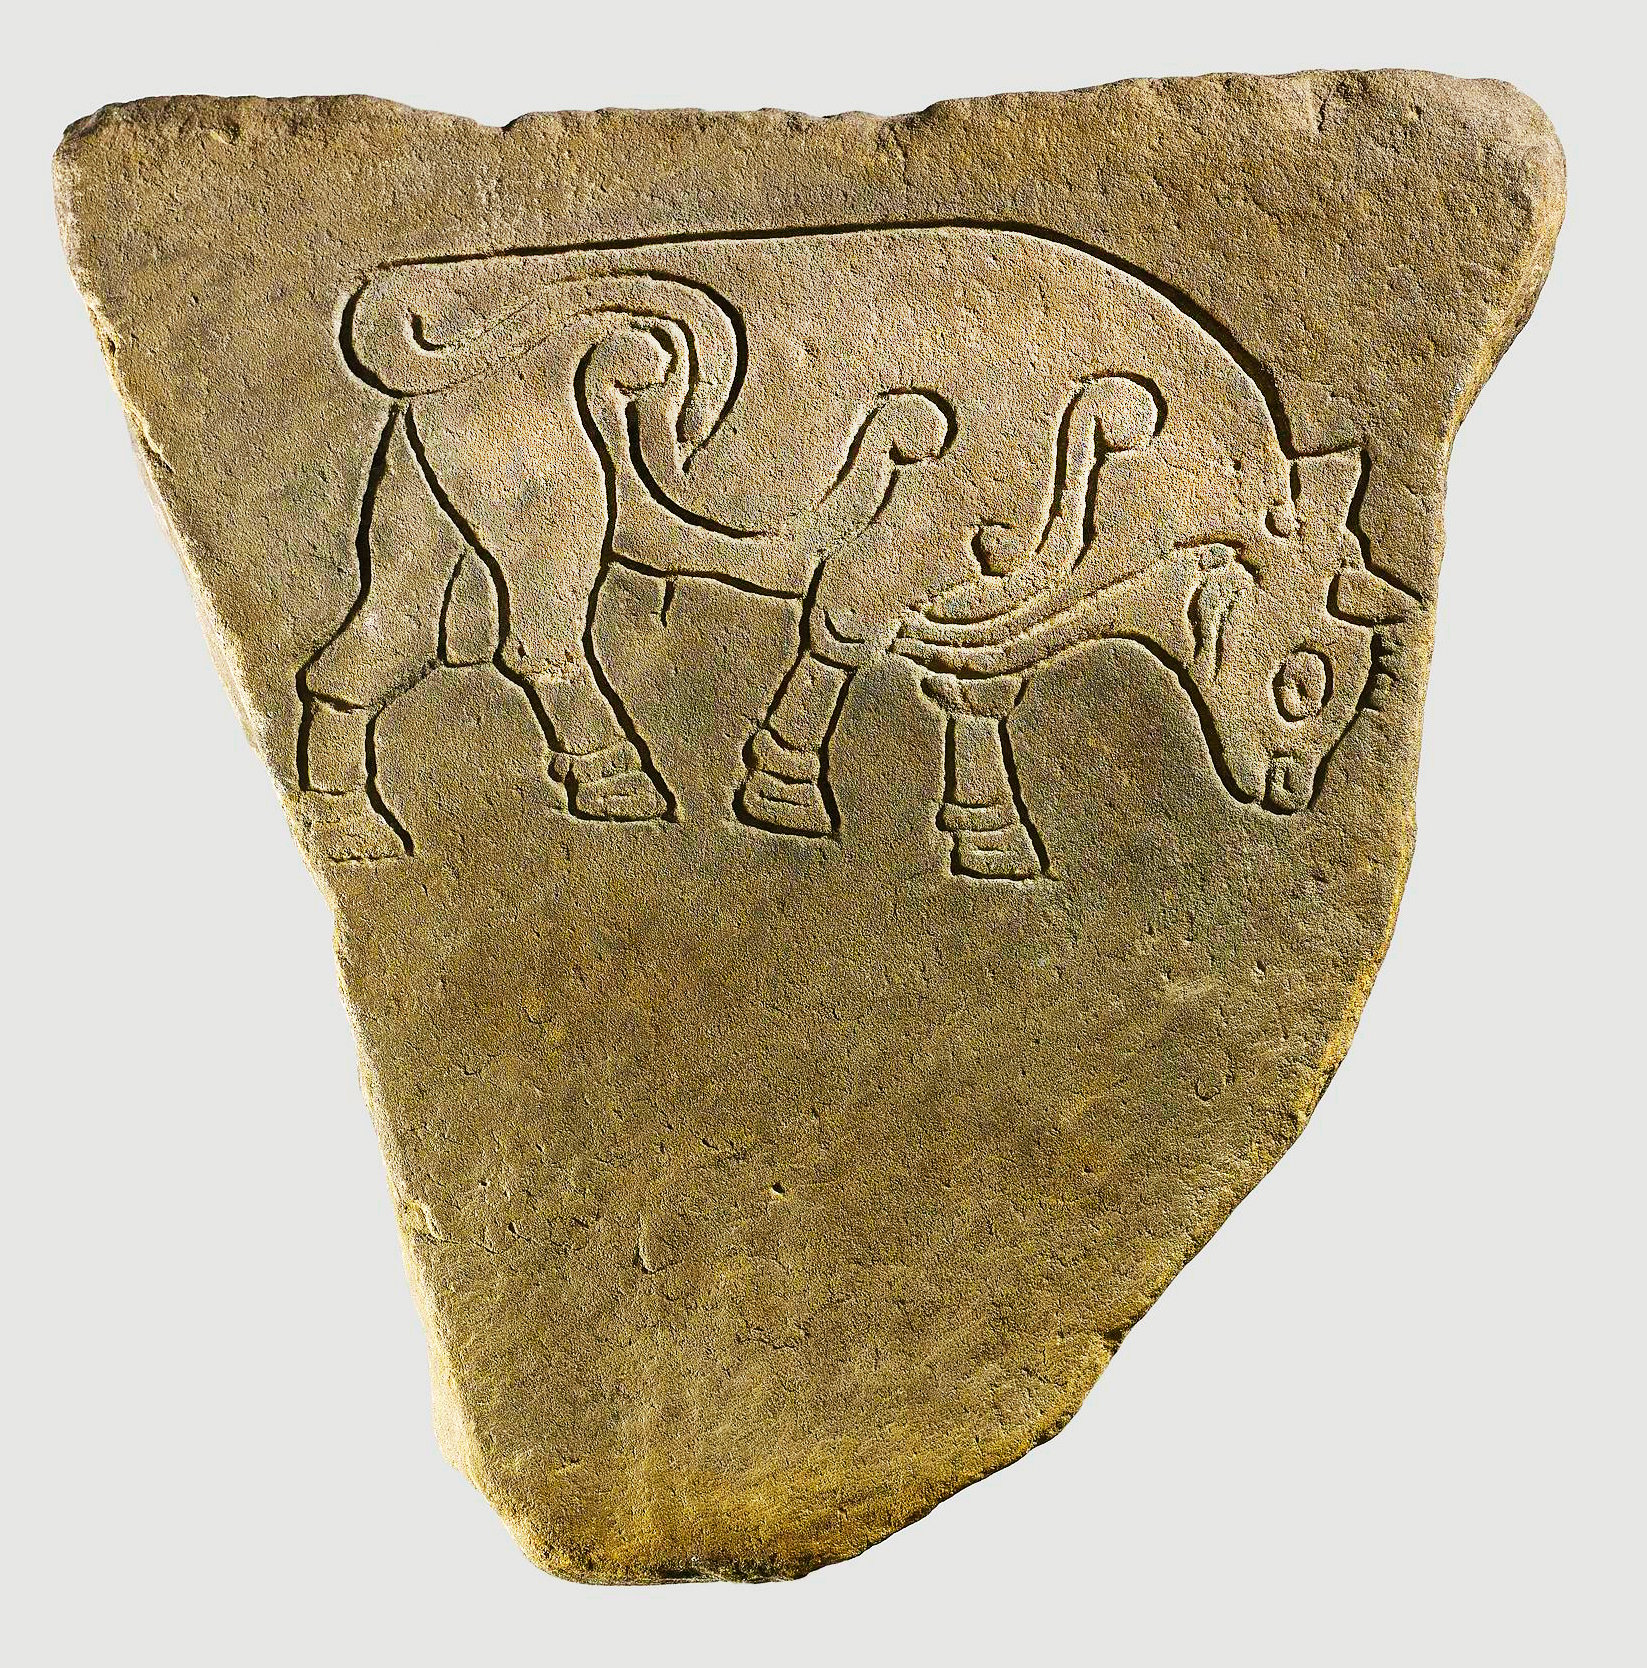 Triangular Pictish Symbol stone in dark brown, featuring an engraved depiction of a bull with ornate scrolls on its hip and shoulder.